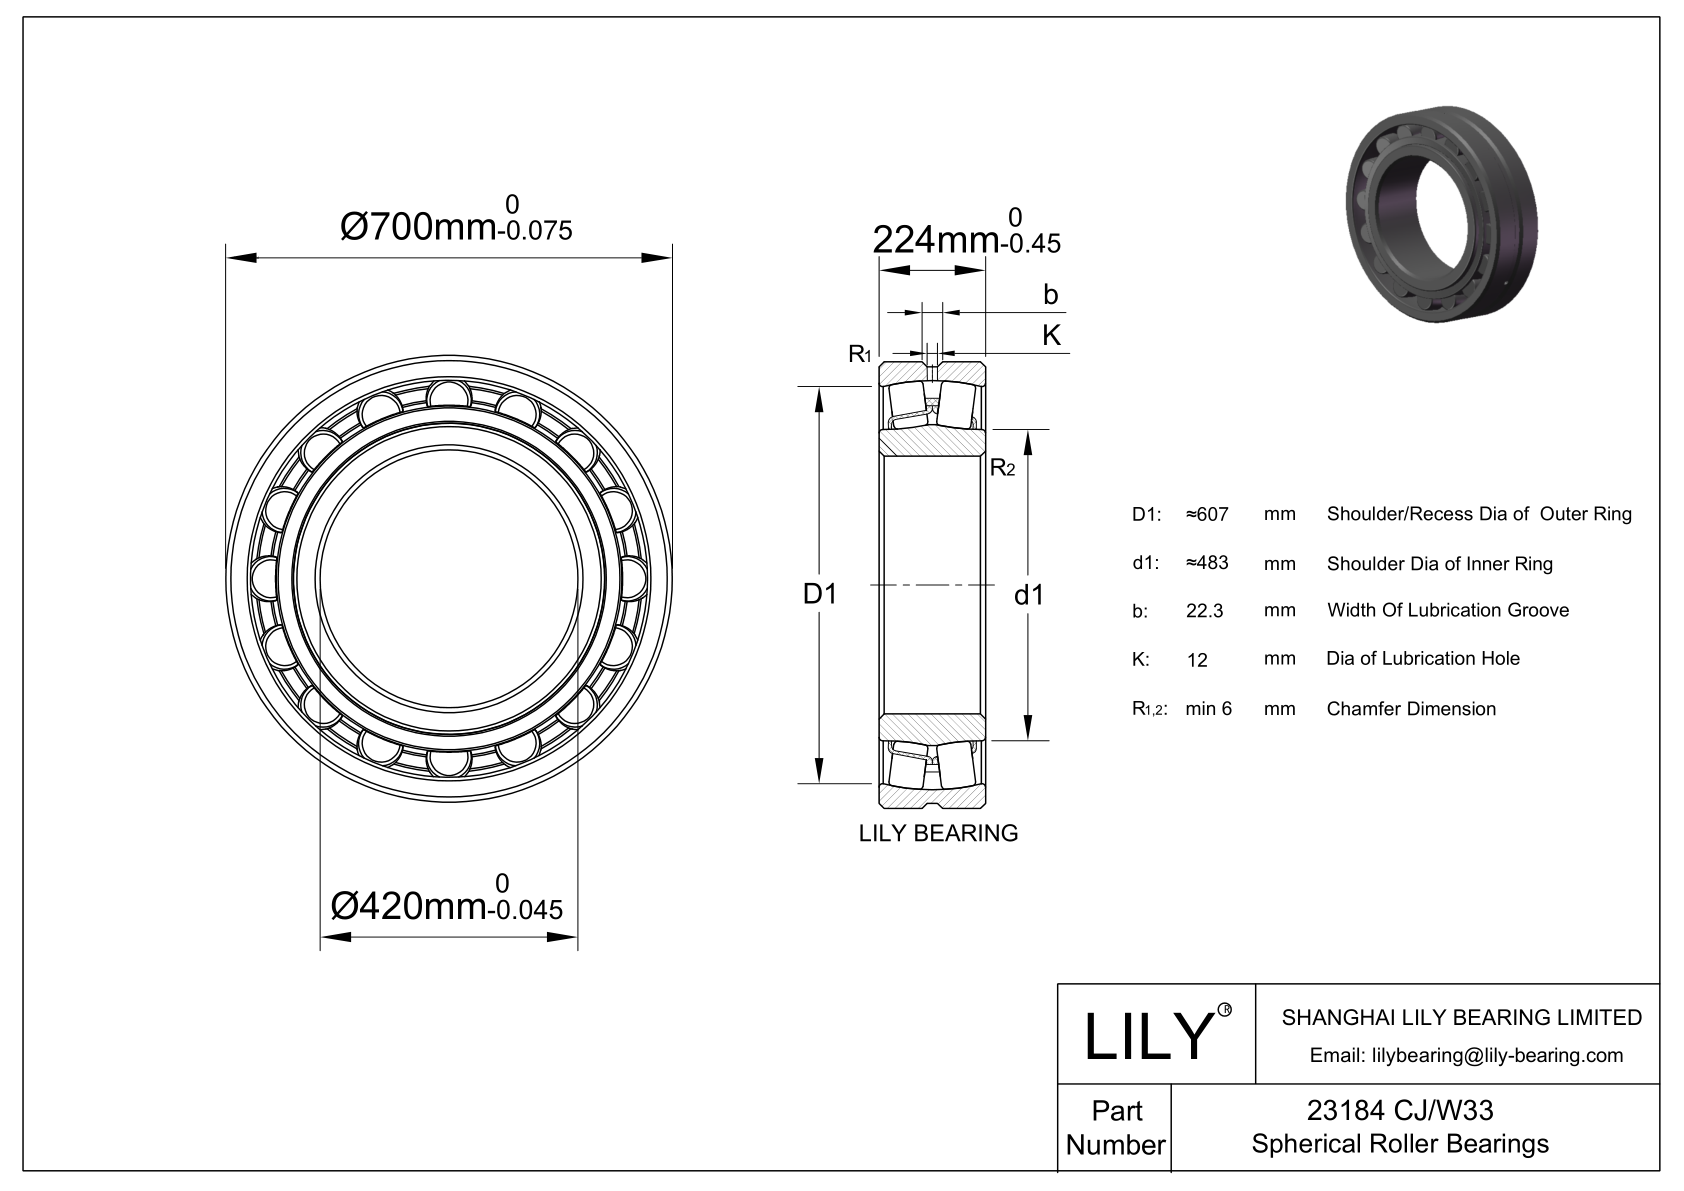 23184 CJ/W33 Double Row Spherical Roller Bearing cad drawing